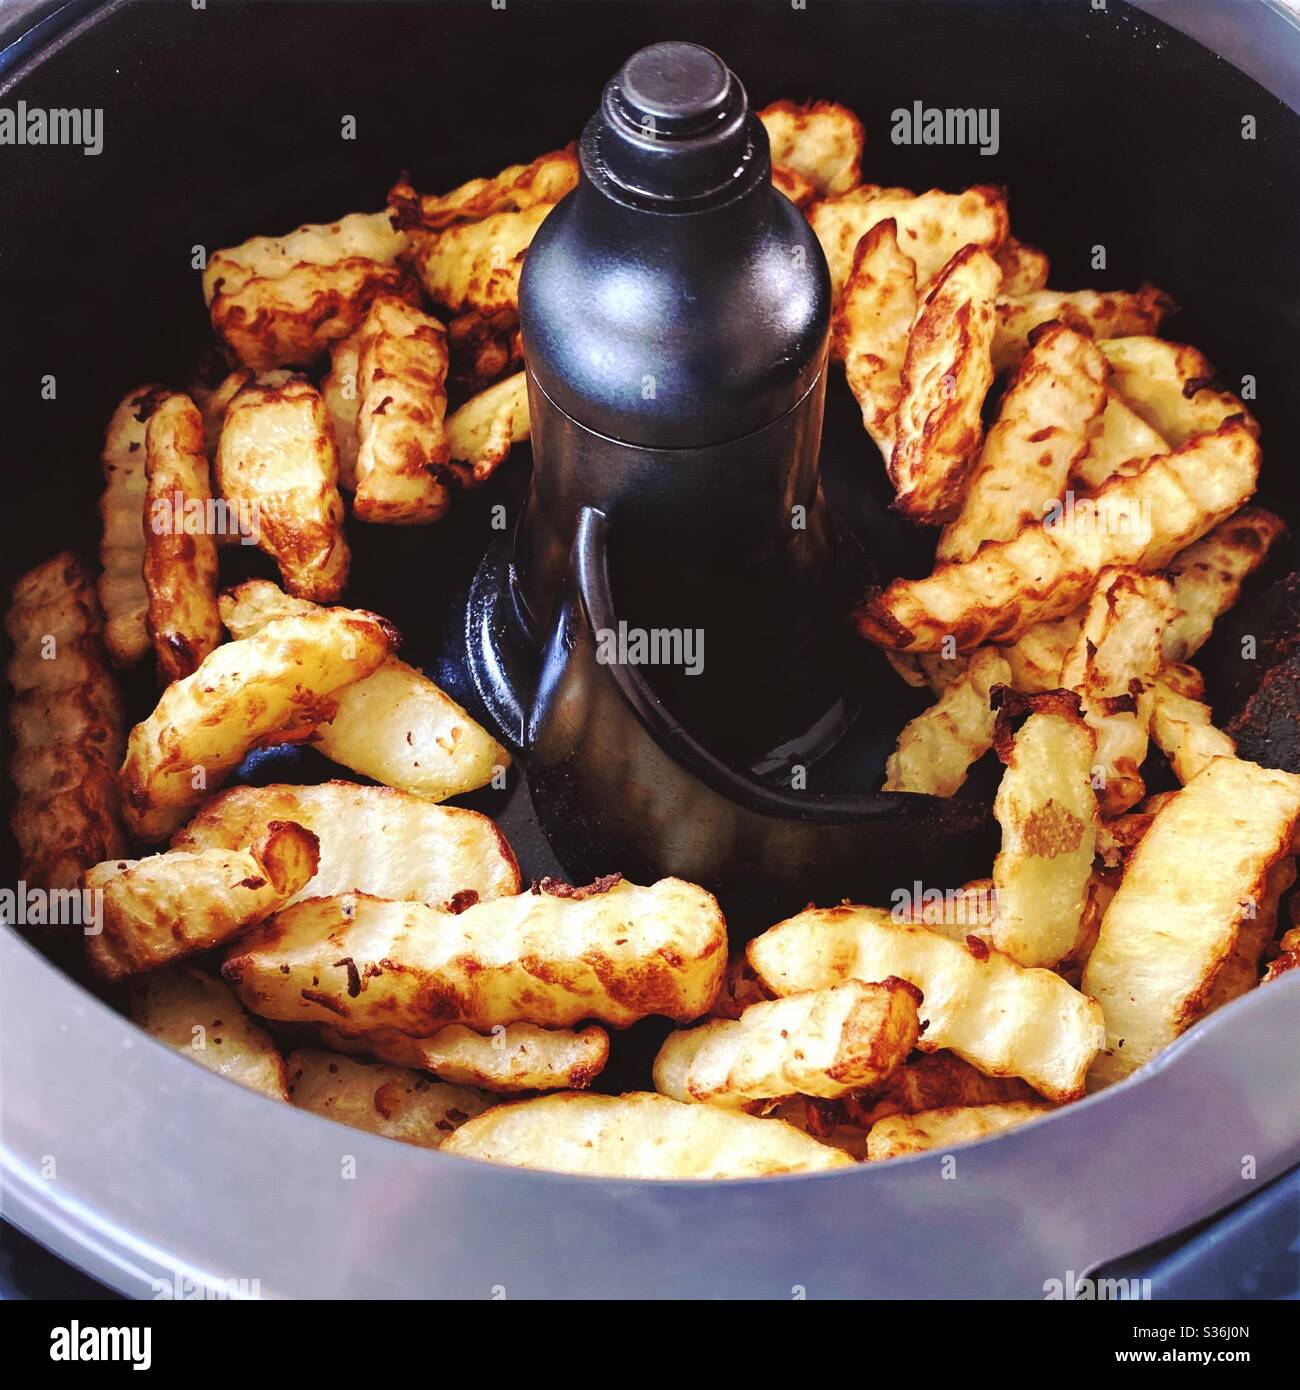 https://c8.alamy.com/comp/S36J0N/closeup-view-of-crinkle-cut-fries-in-the-pan-of-a-rotating-air-fryer-homemade-fries-with-a-crinkle-cutter-fried-in-hot-air-a-healthier-way-of-cooking-crispy-potato-chips-for-dinner-S36J0N.jpg